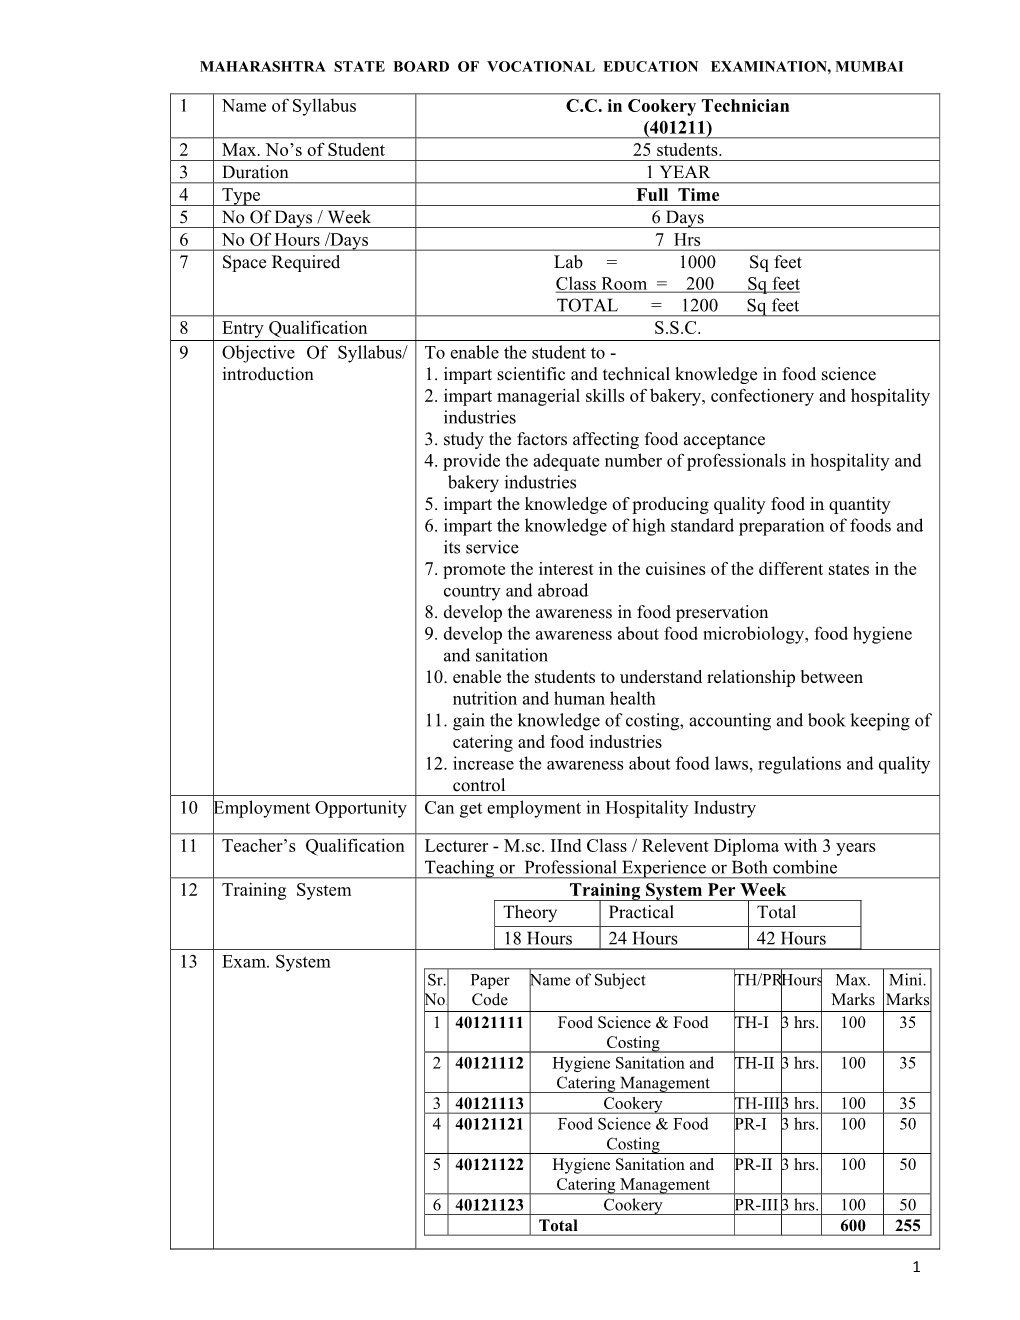 1 Name of Syllabus C.C. in Cookery Technician (401211) 2 Max. No's of Student 25 Students. 3 Duration 1 YEAR 4 Type Full Time